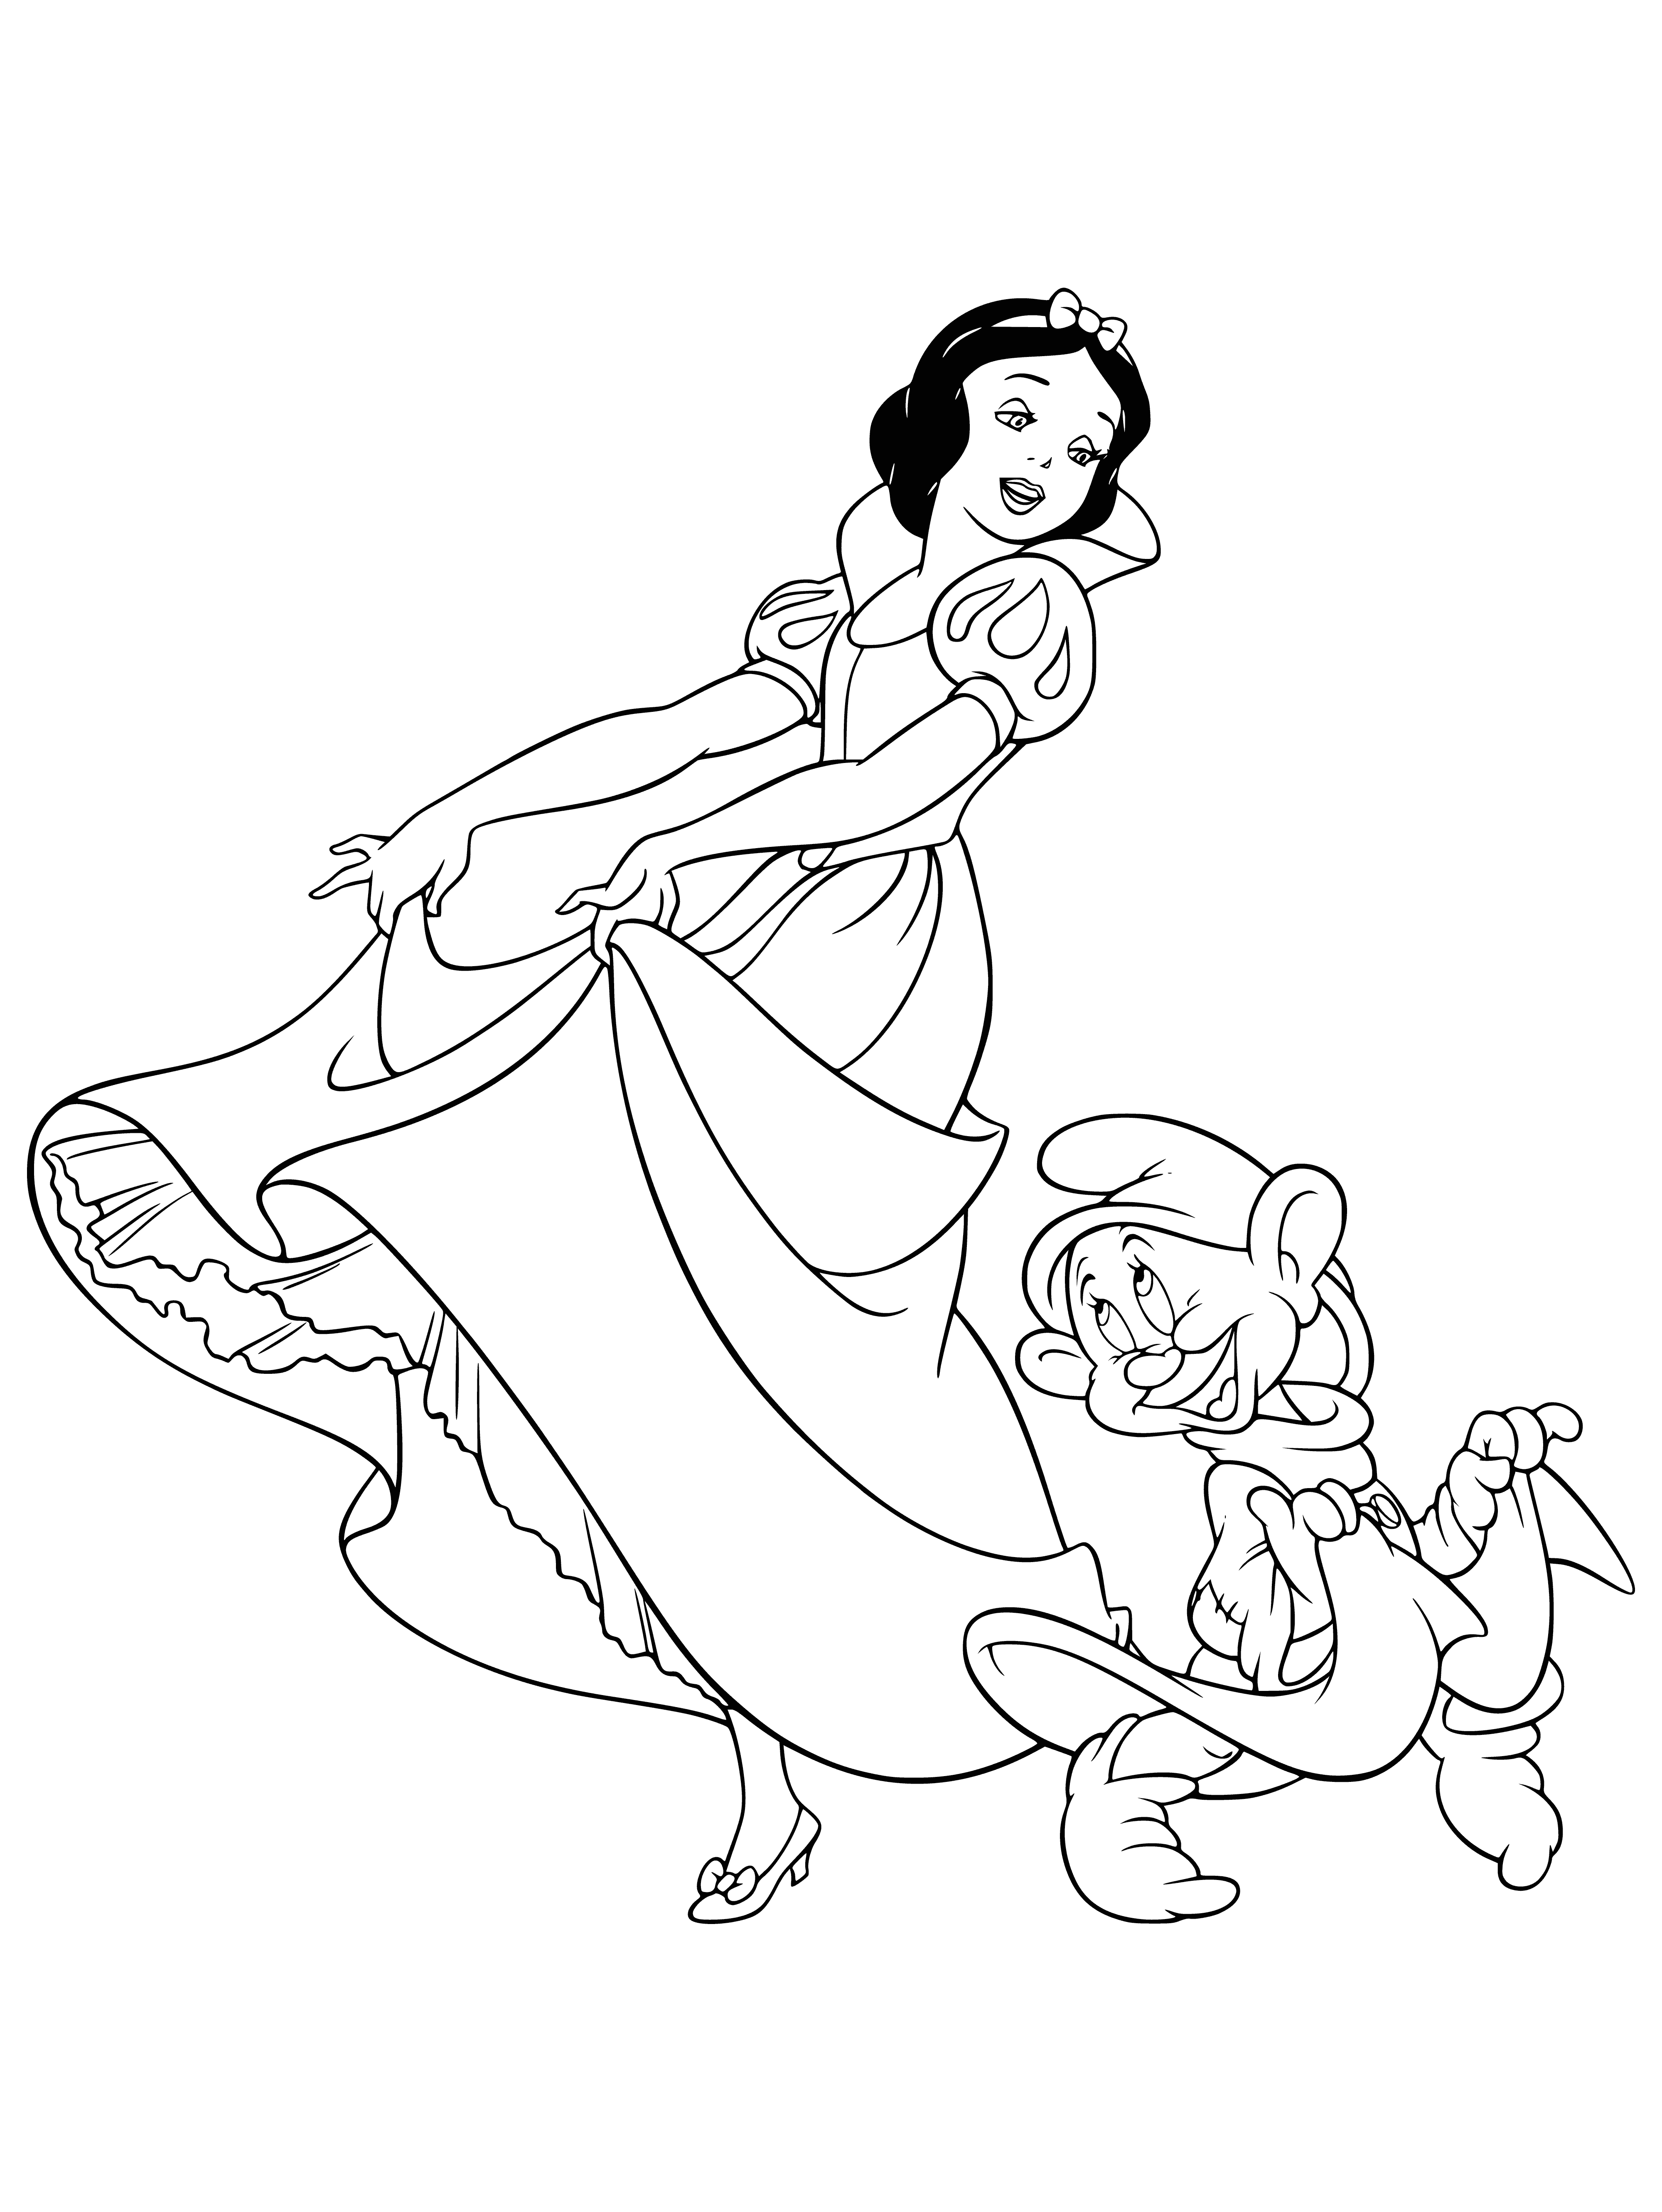 coloring page: Snow White dances in a ring with seven gnomes wearing brown hats and green vests. She is wearing a red and white Bavarian dress with a white apron, and her hair is in a braided crown. One gnome plays a pipe while the others dance.